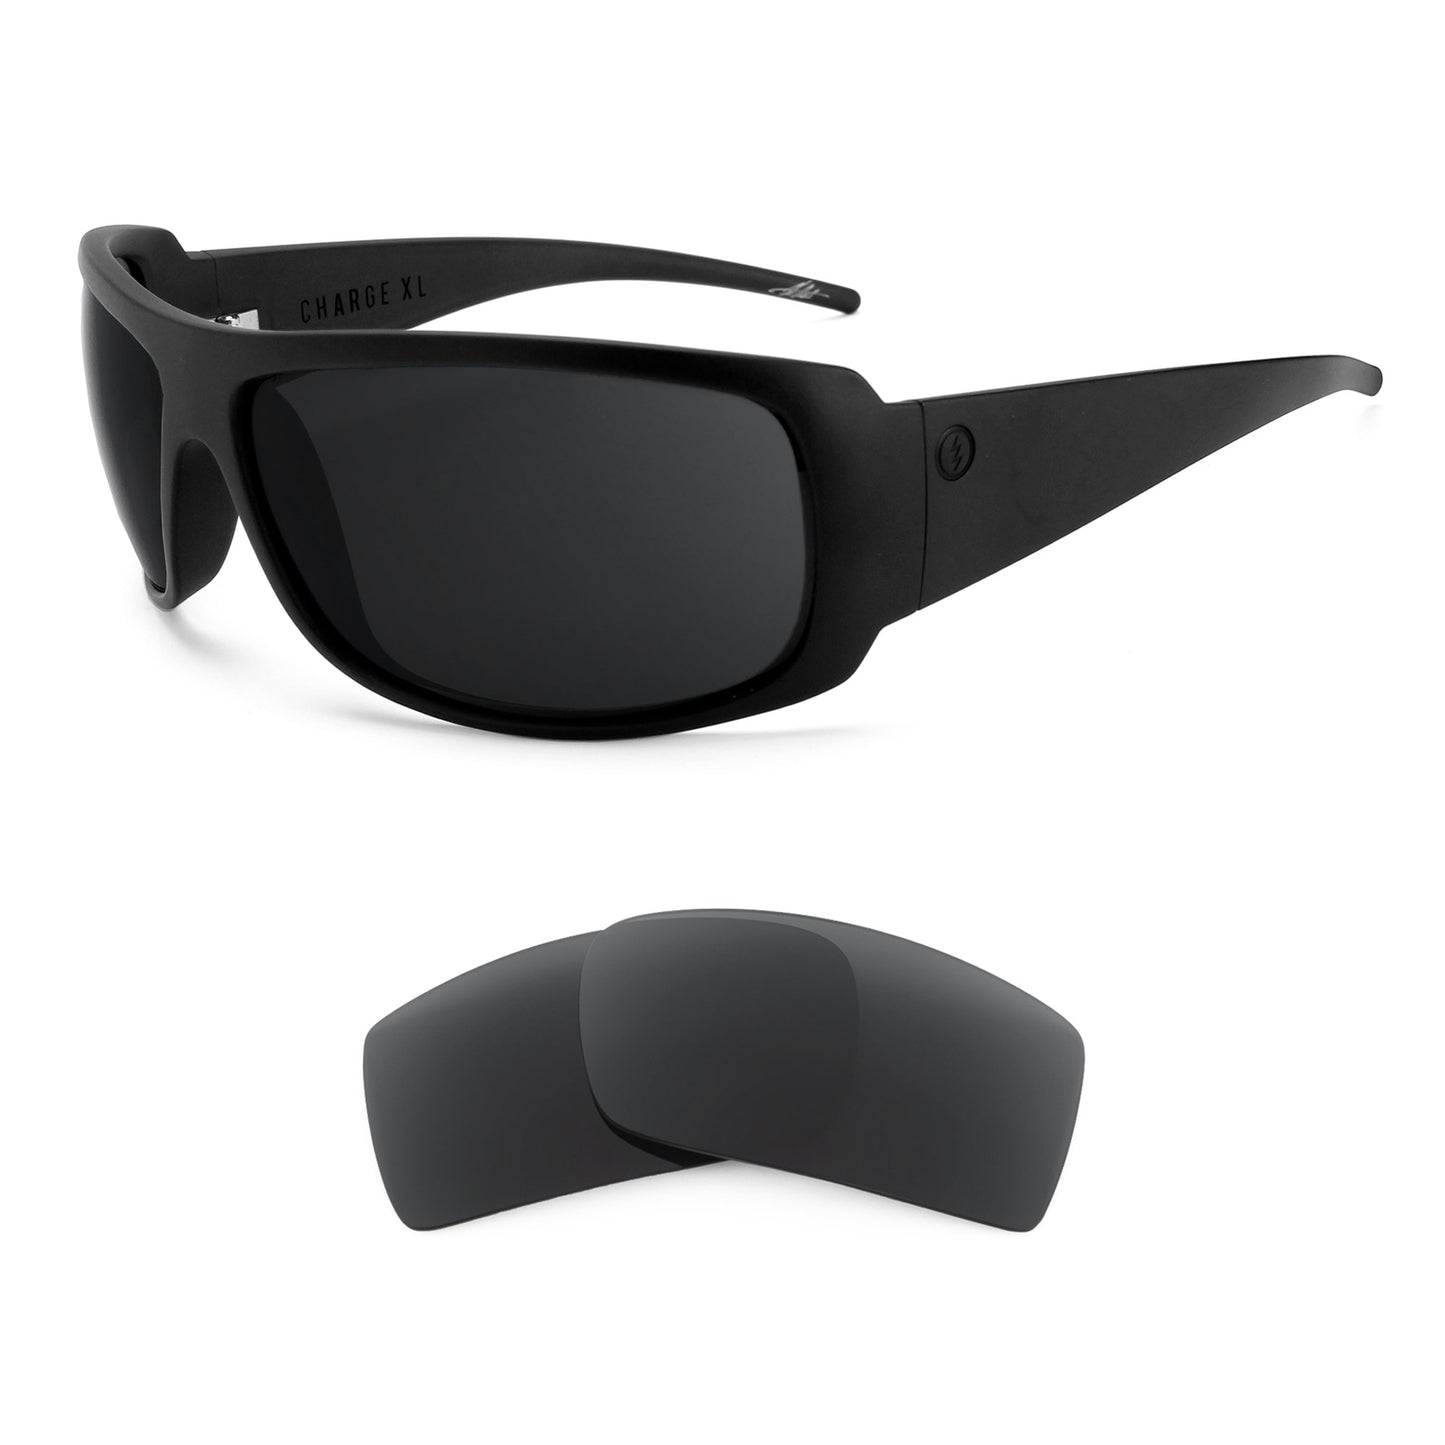 Electric Charge XL sunglasses with replacement lenses